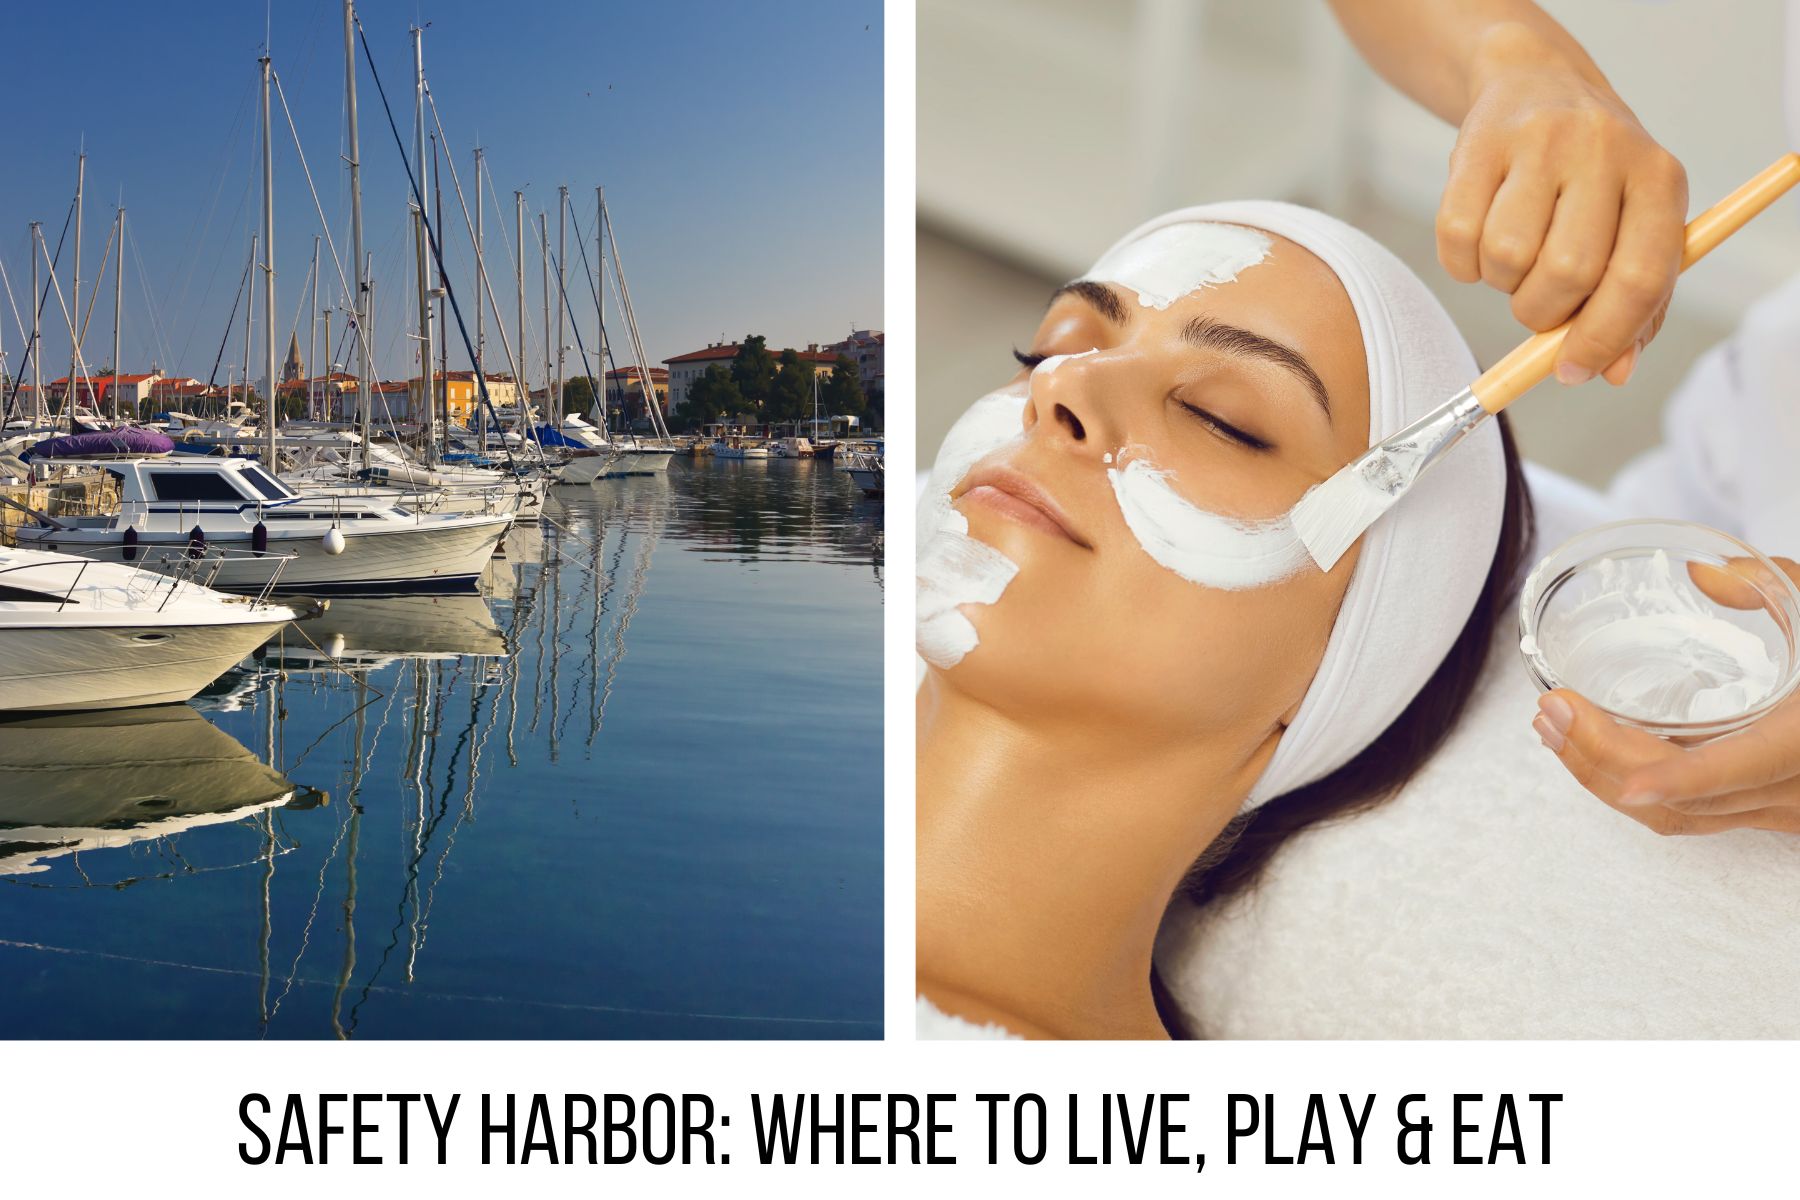 Safety Harbor community guide